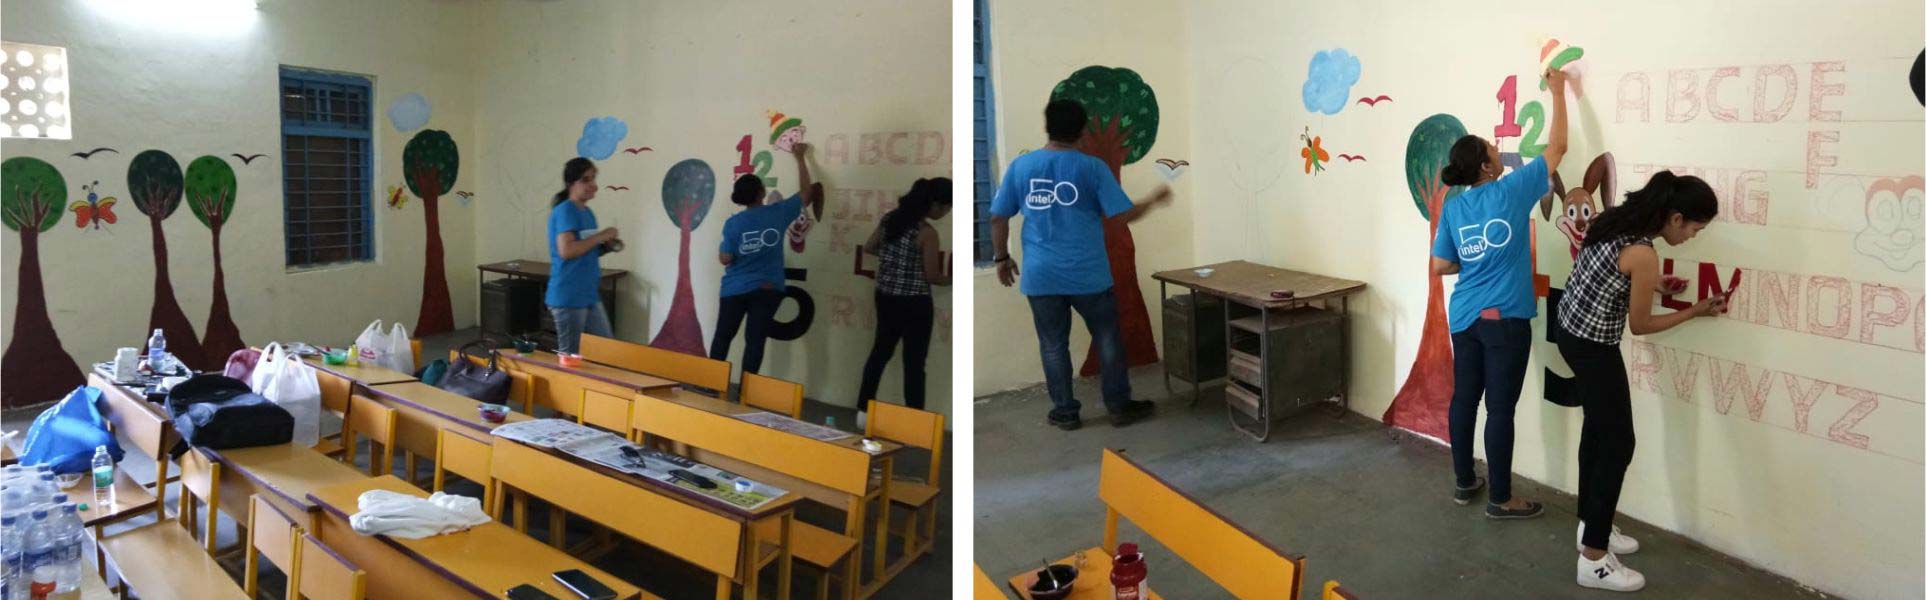 Intel employees paint classrooms for children of Mission Education centre